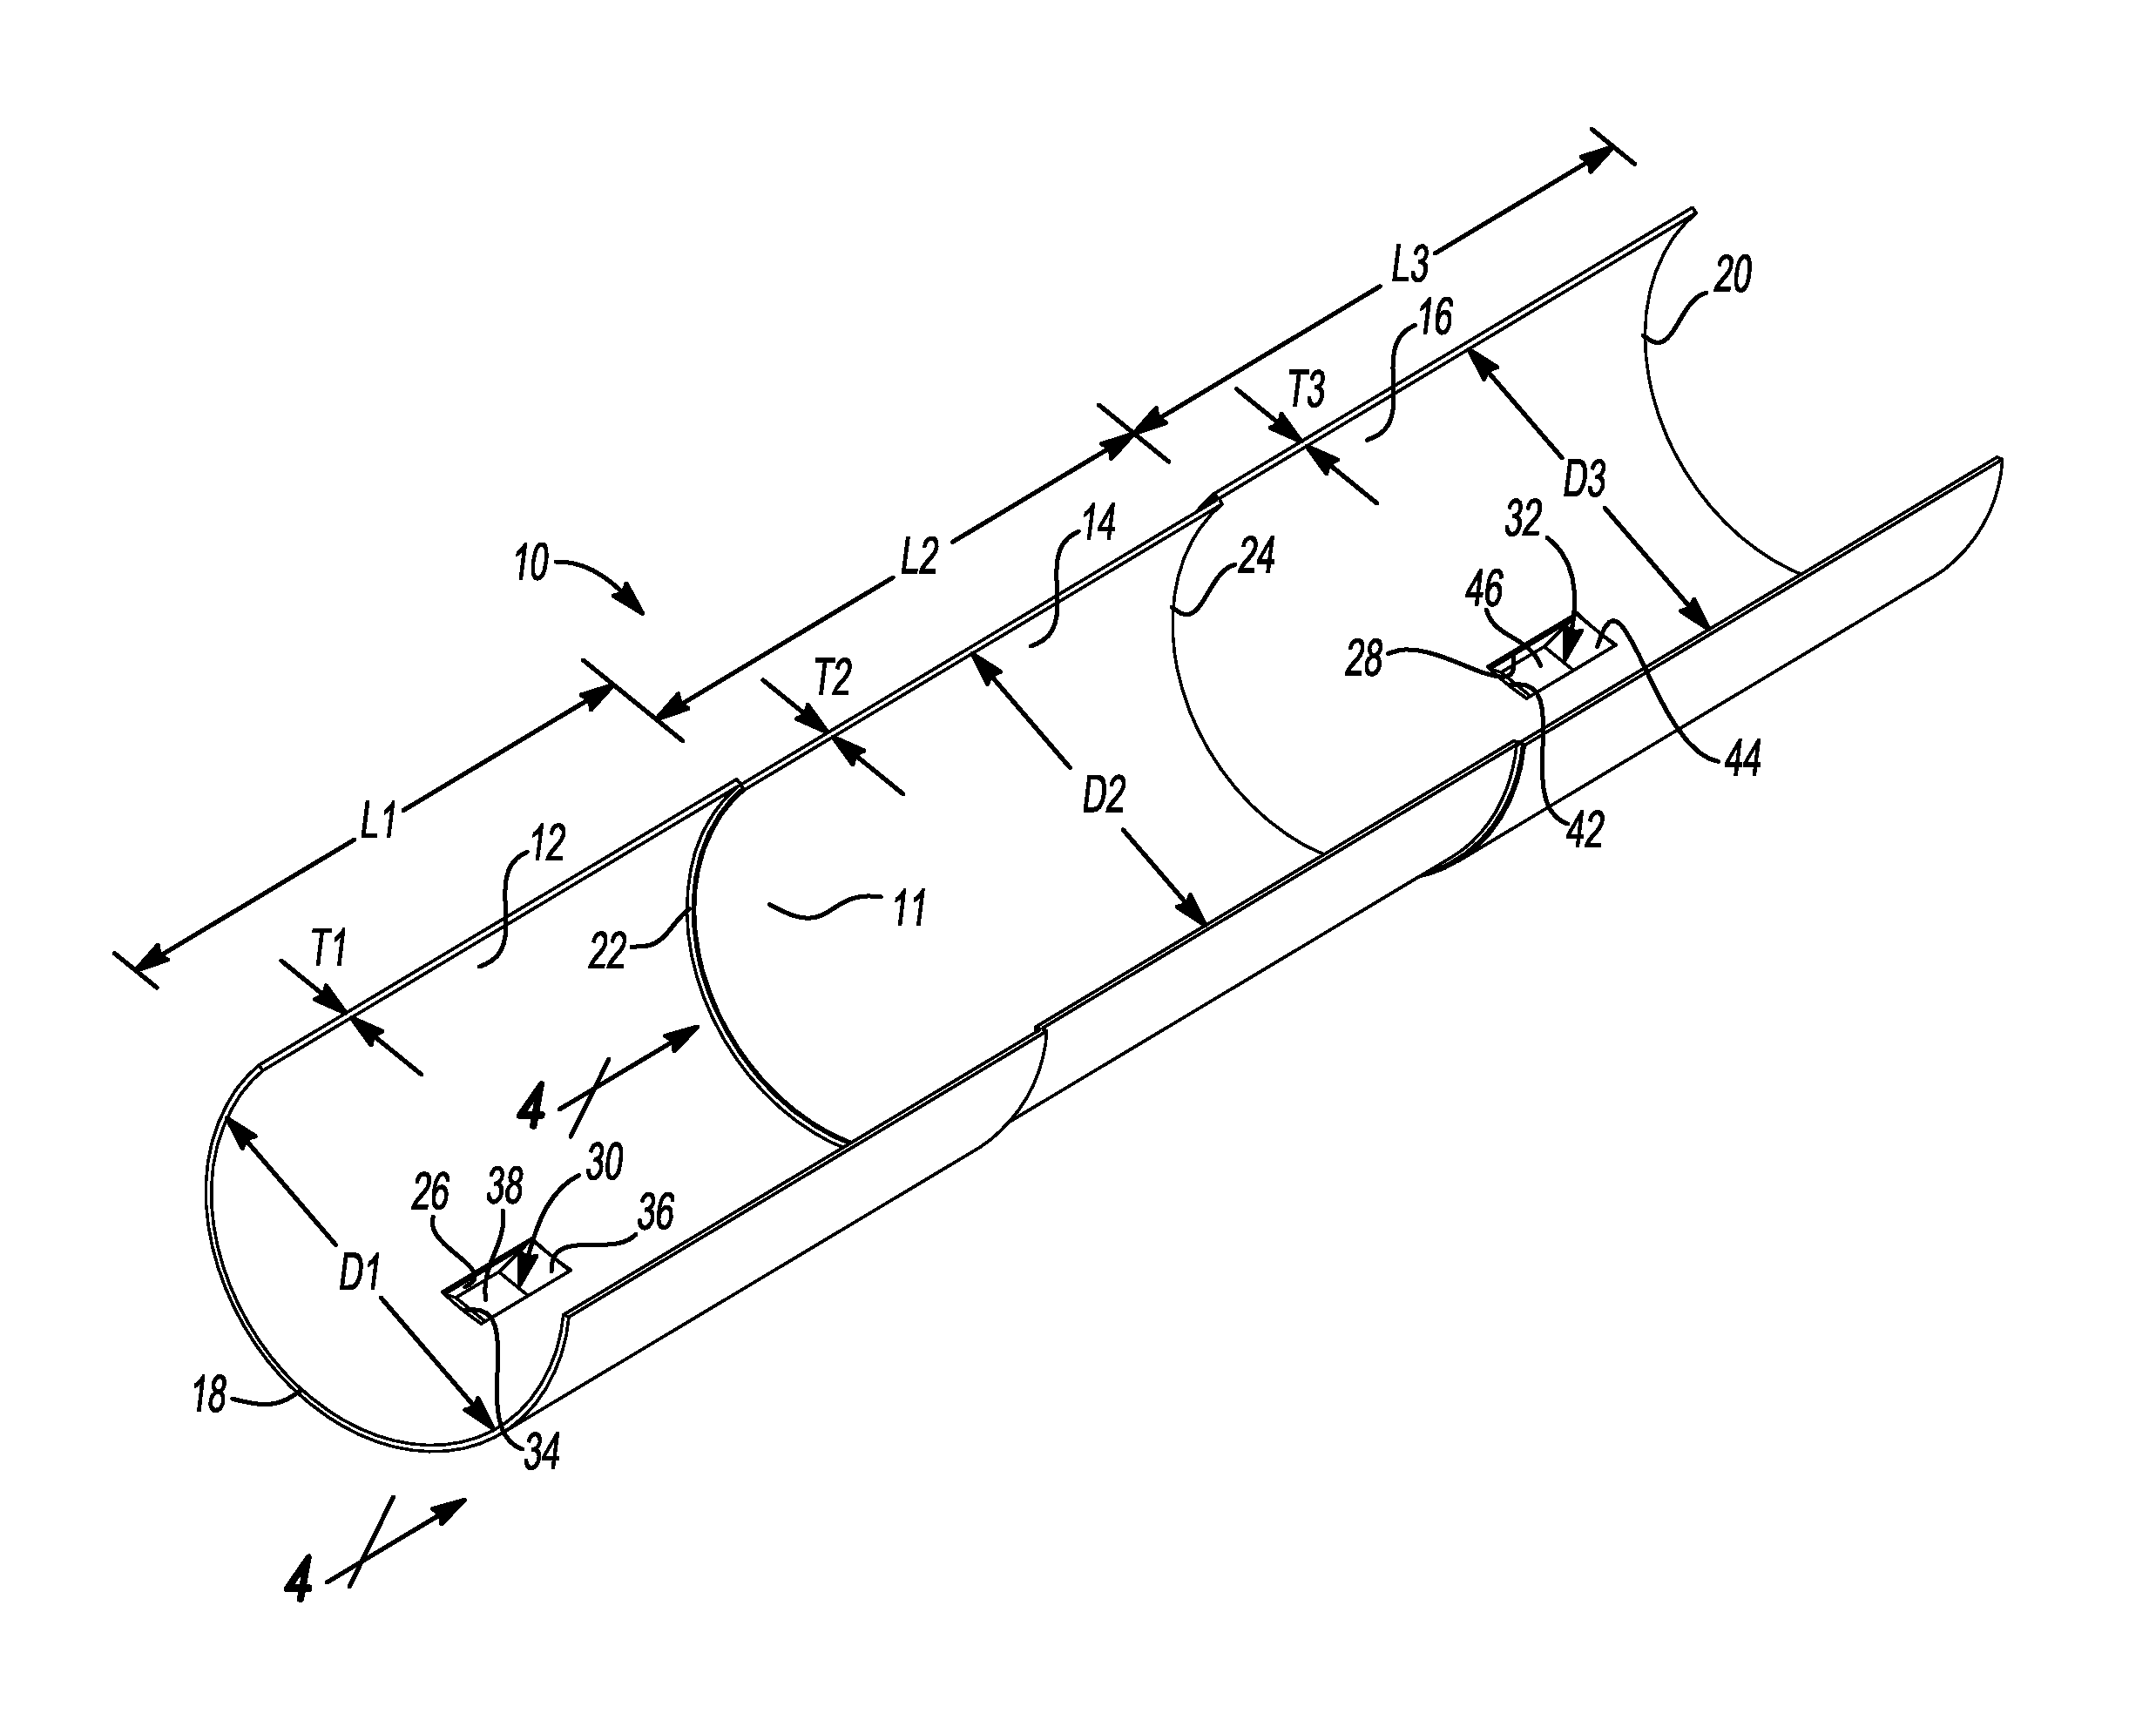 Conduit hanger and support apparatus